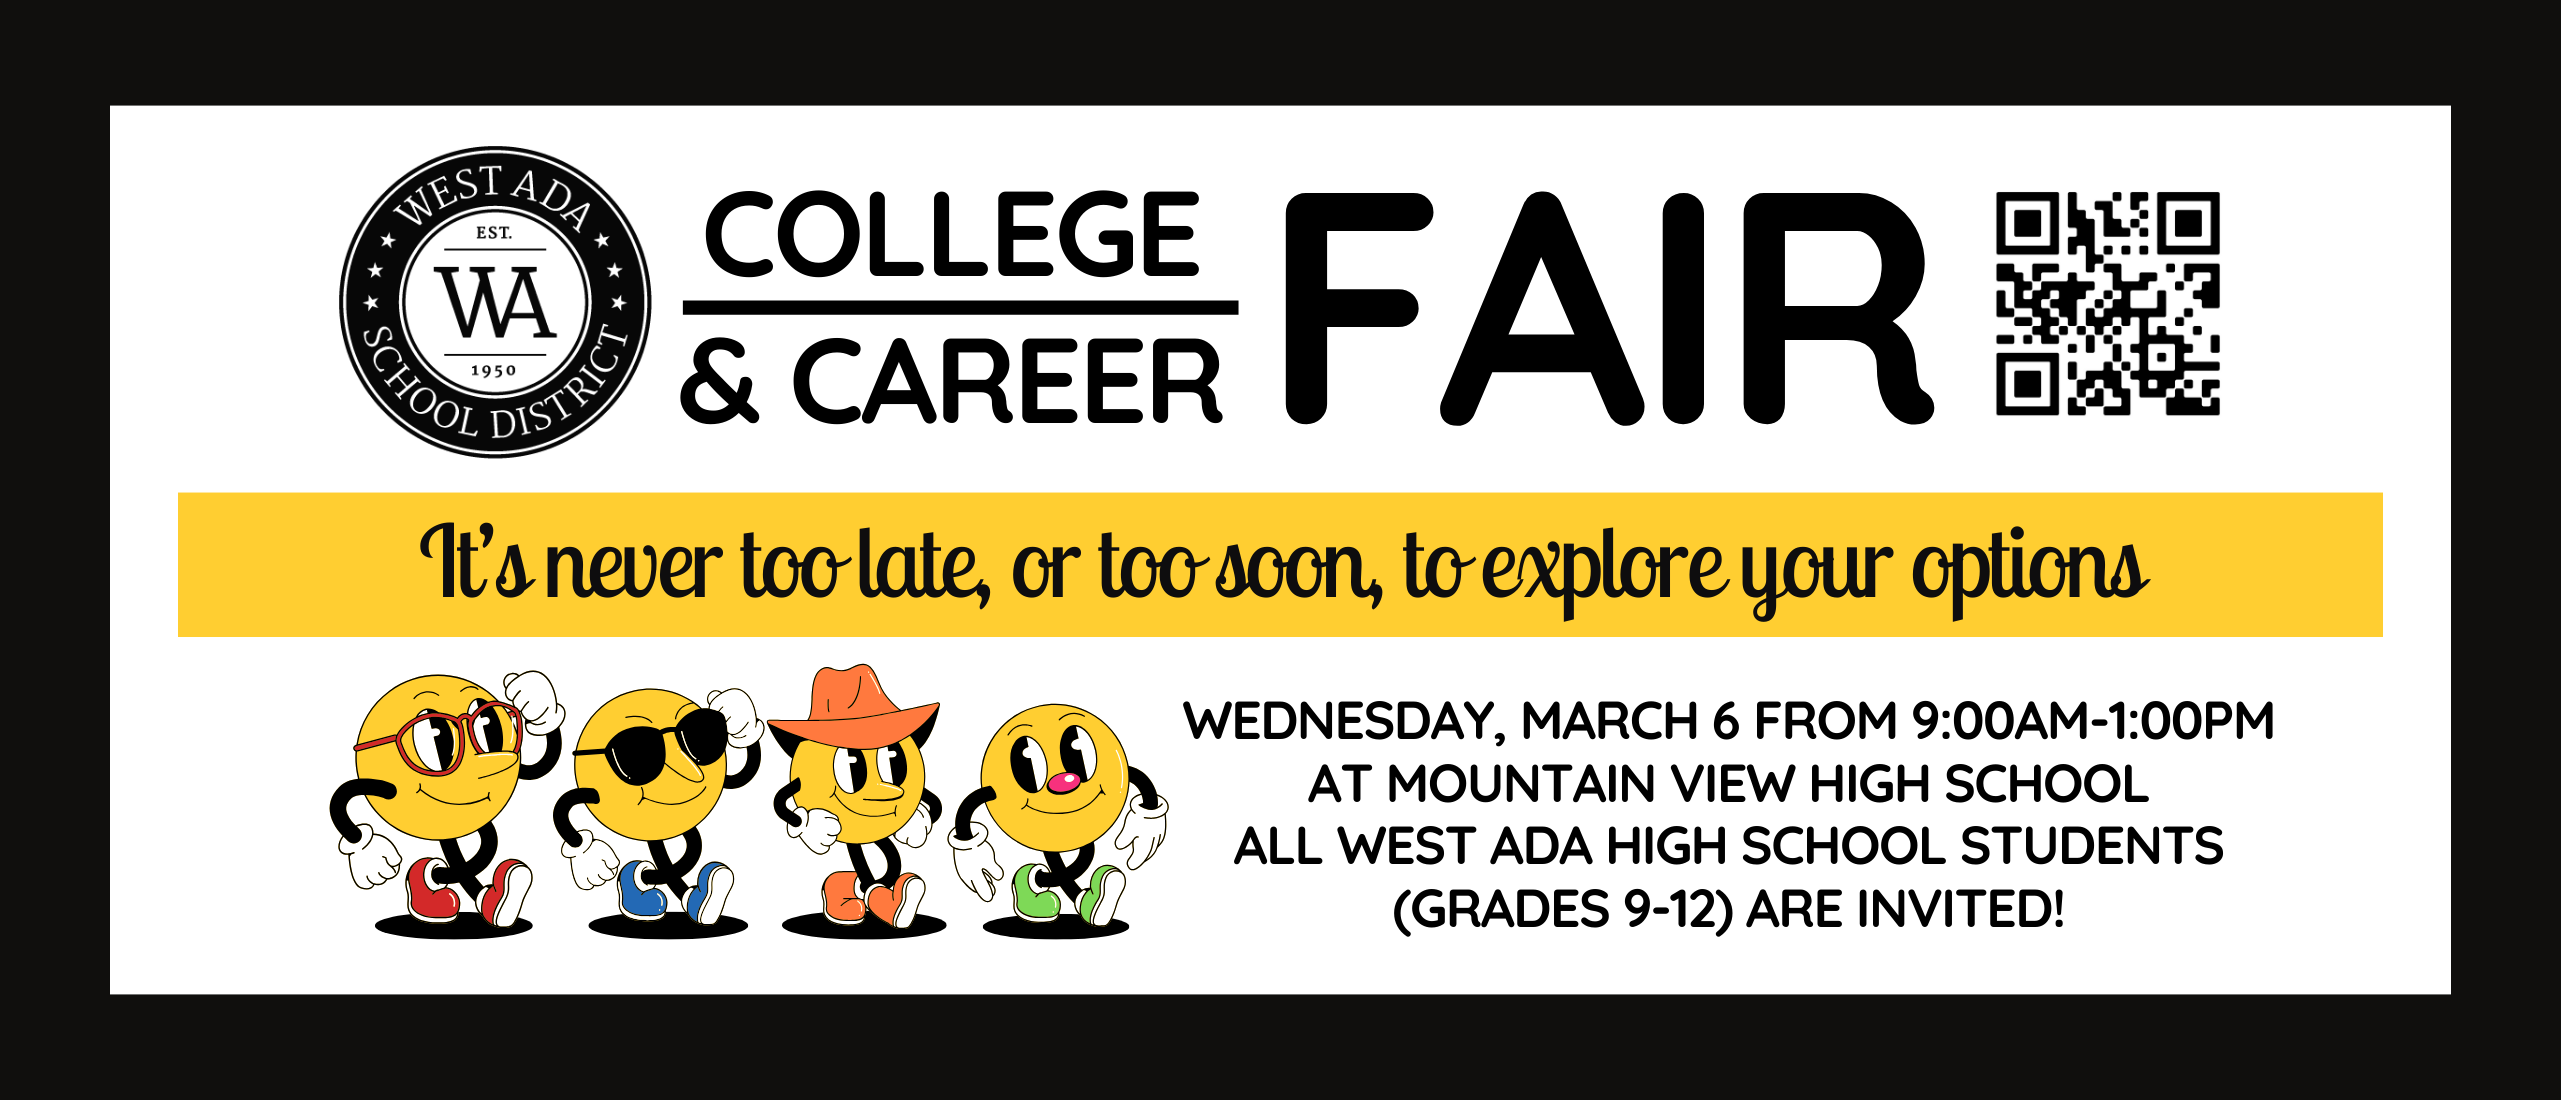 wset ada school district college and career fair - qr code - it's never too late, or too soon, to explore your options - wednesday, march 6 from 9:00am-1:00pm at mountain view high school - all west ada high school students (grades 9-12) are invited